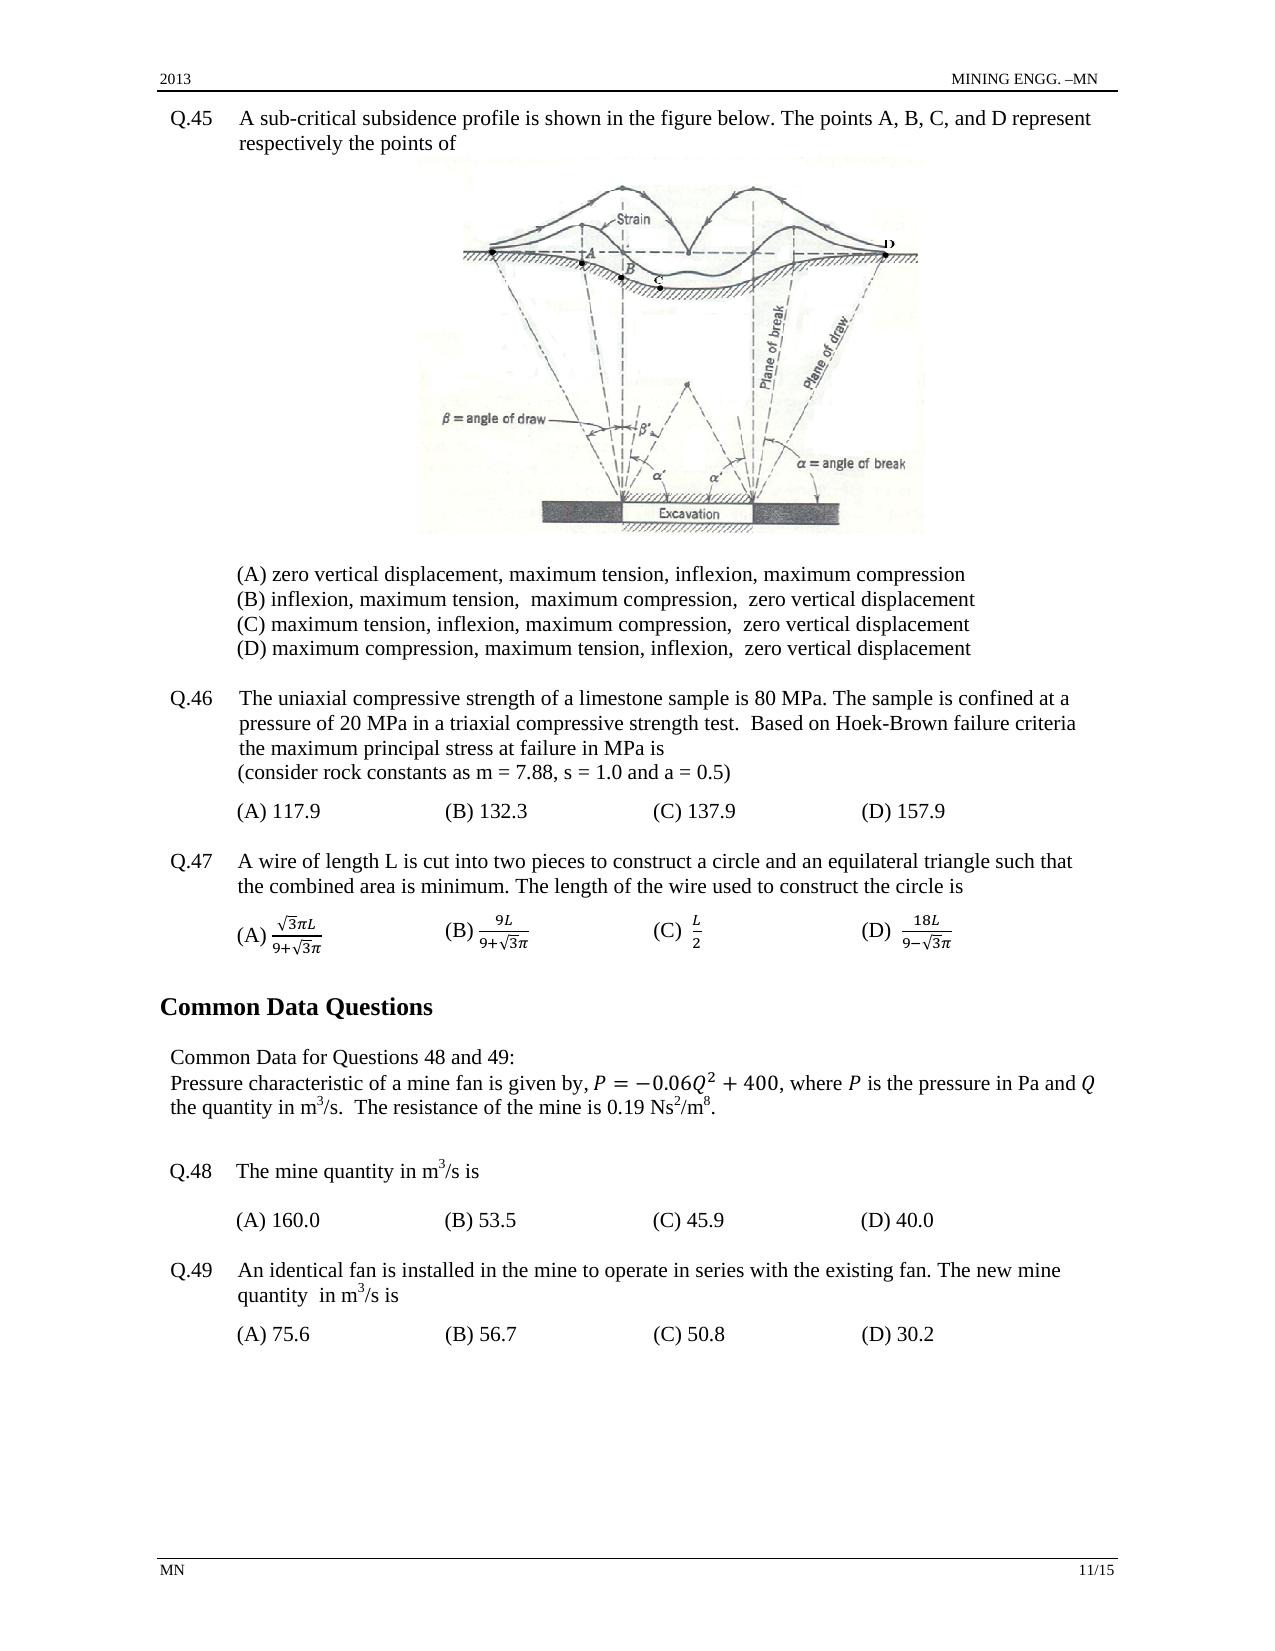 GATE 2013 Mining Engineering (MN) Question Paper with Answer Key - Page 11